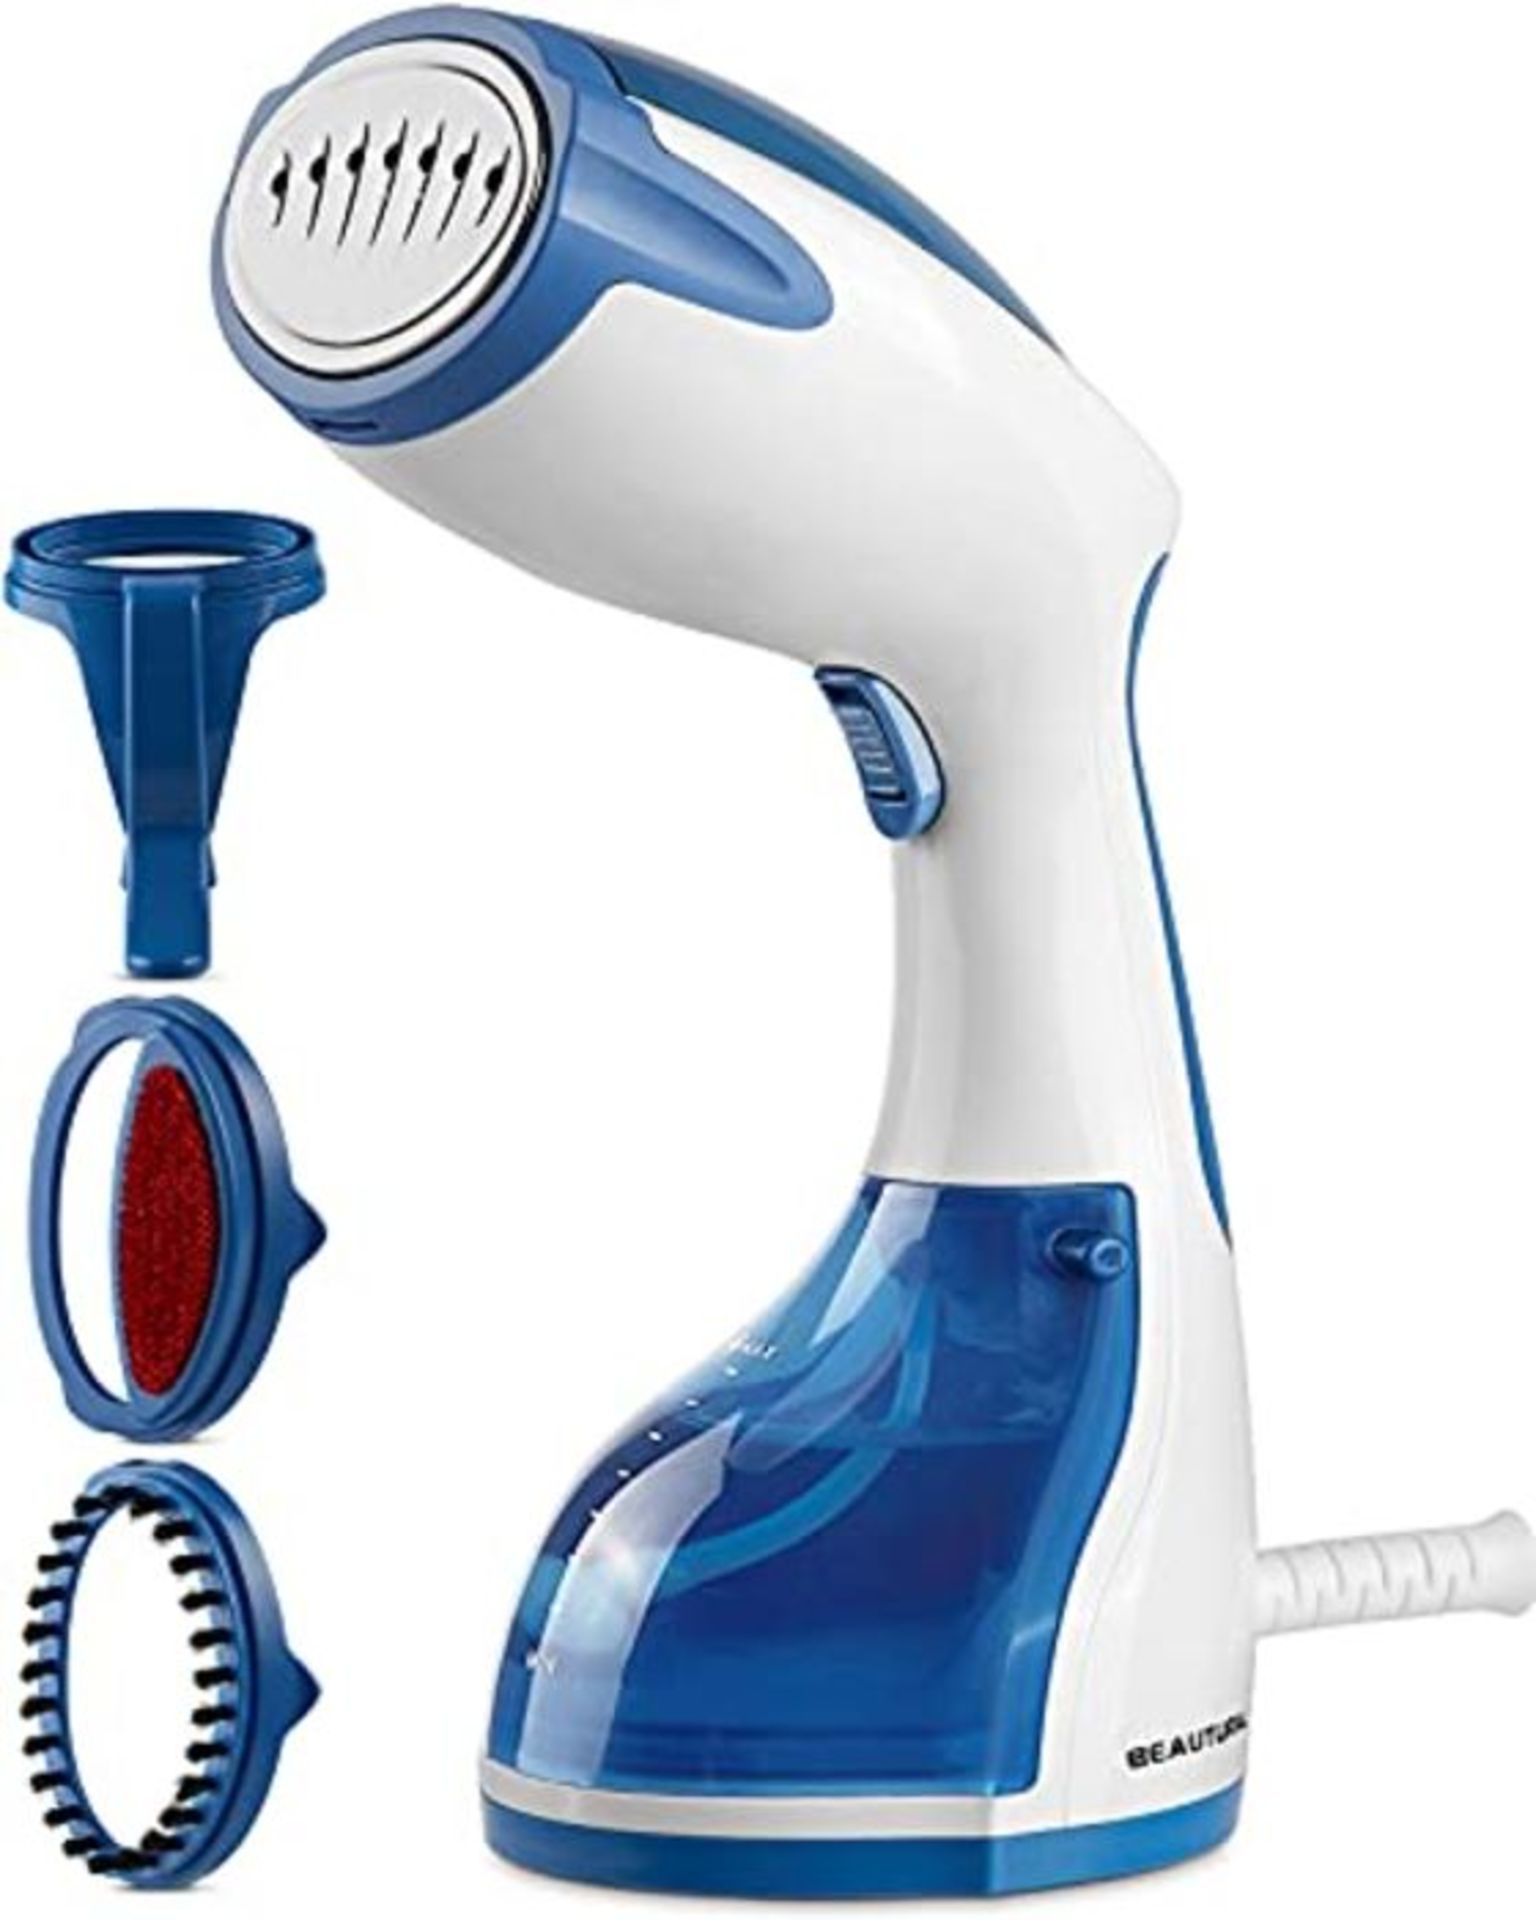 BEAUTURAL Clothes Steamer Handheld Garment Steamer for Home and Travel, Vertically & H